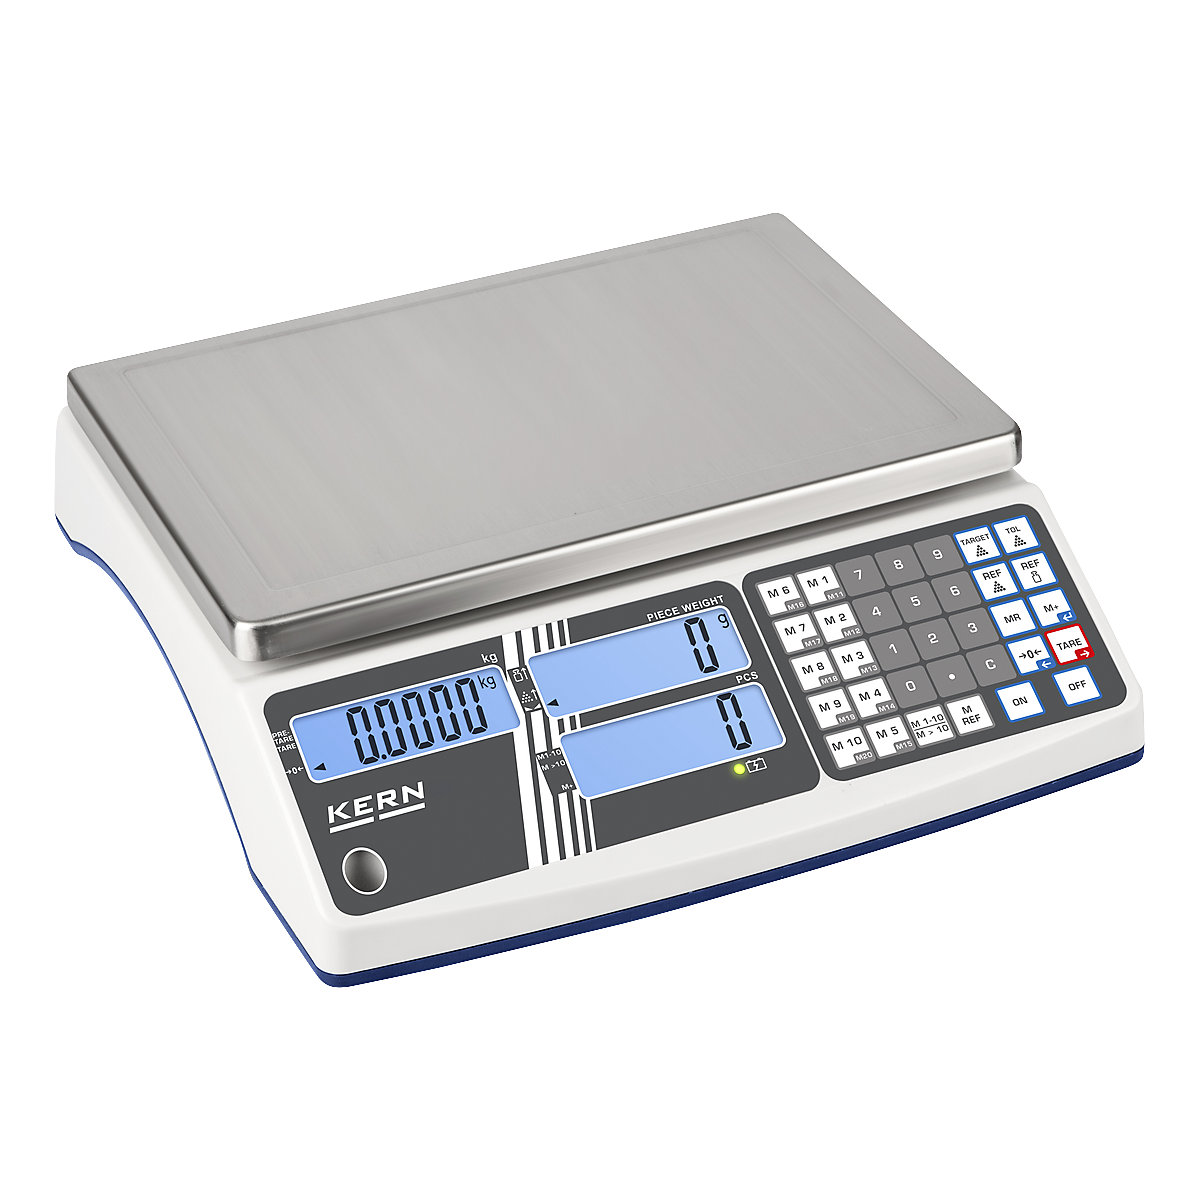 Counting scales – KERN, robust model, weighing range 3 kg, read-out accuracy 0.2 g-1